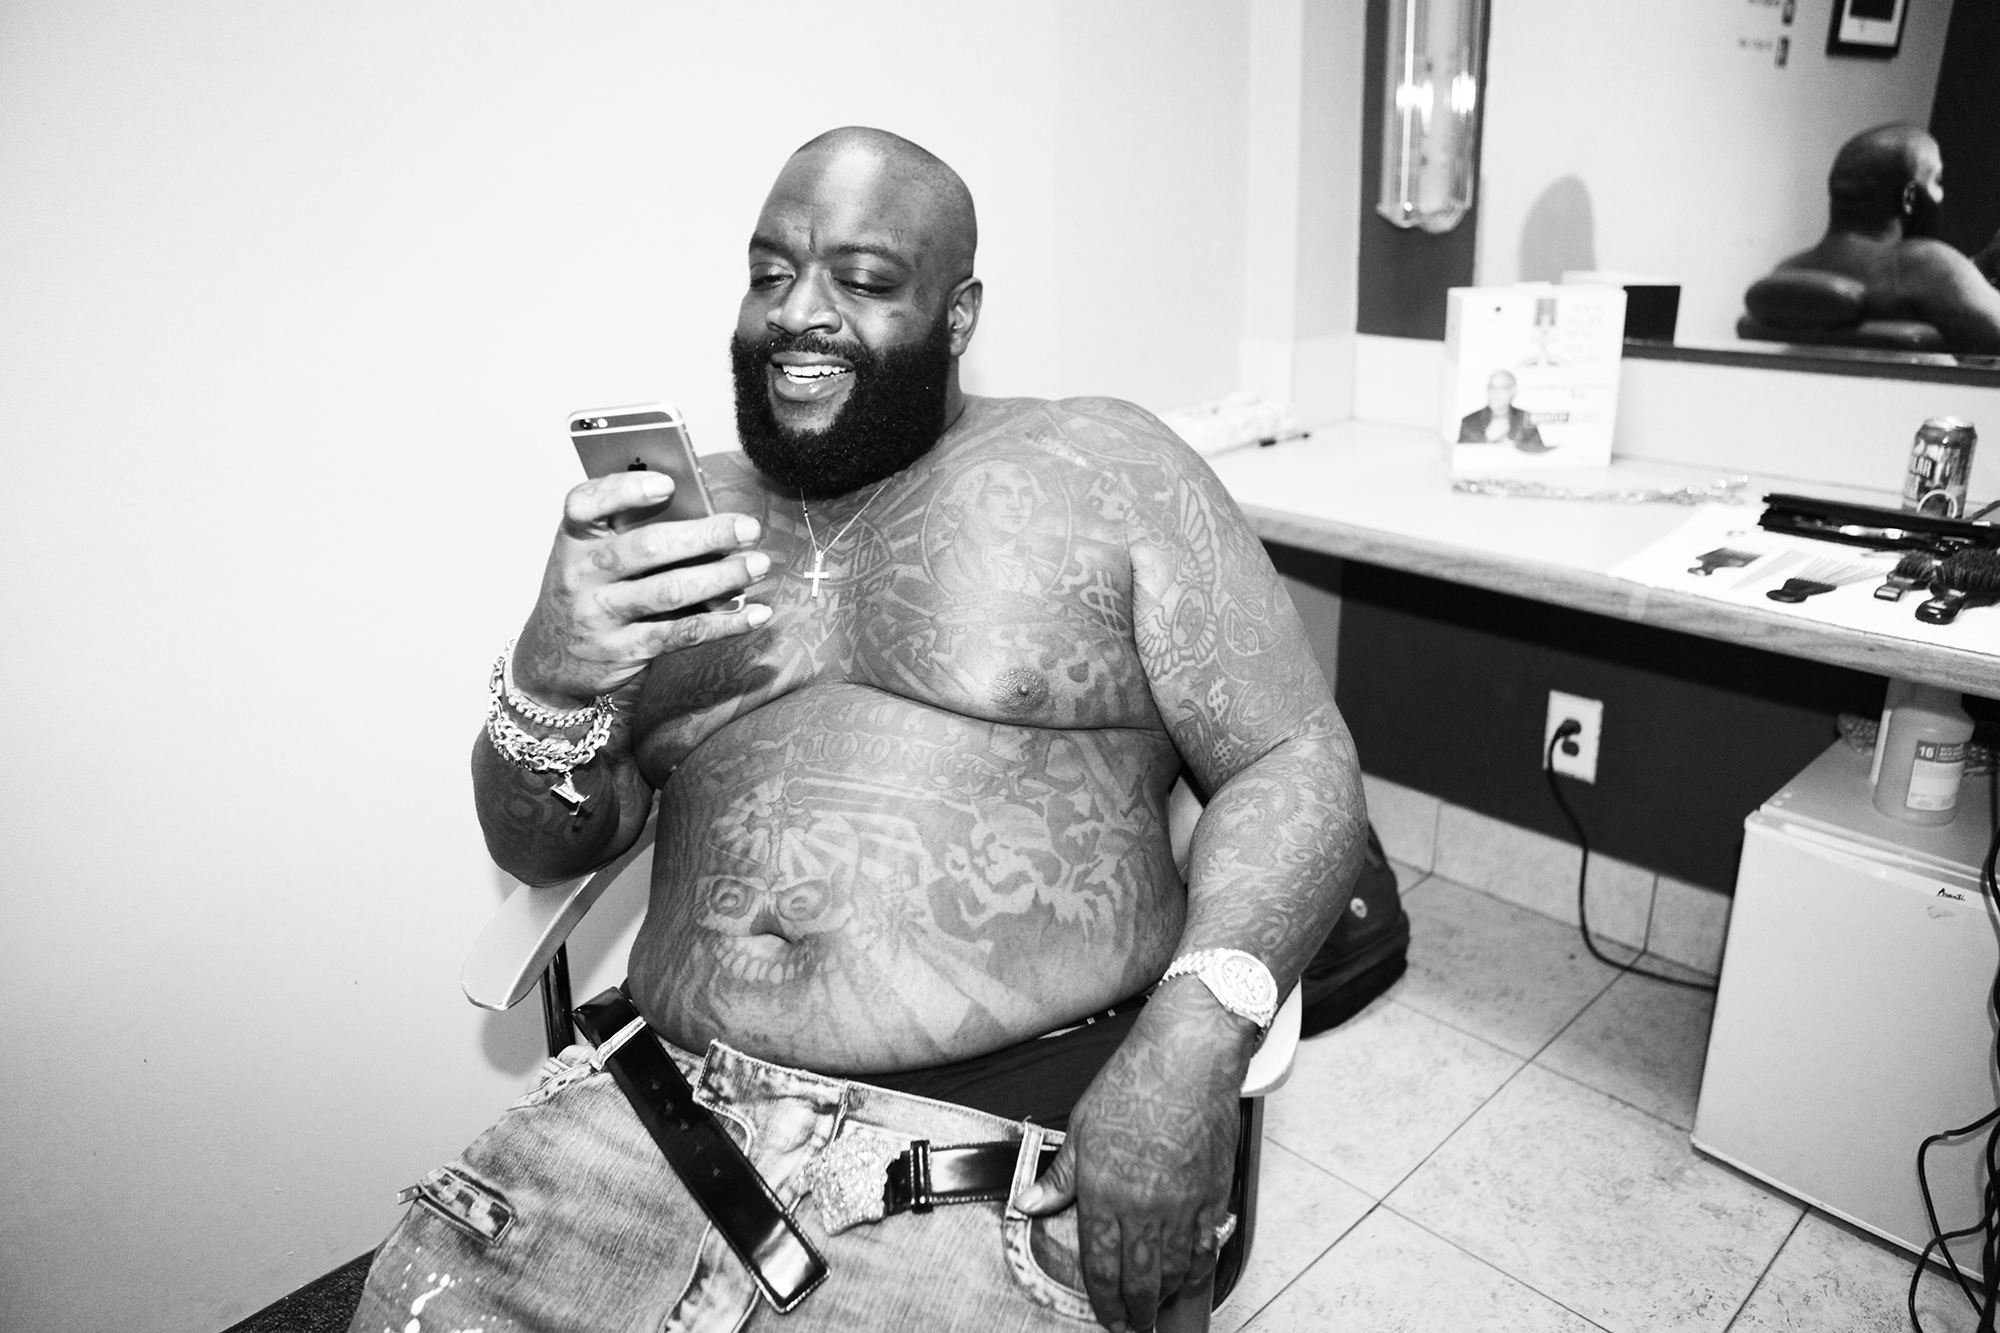 Rick Ross backstage at The Nightly Show with Larry Wilmore on Nov. 12, 2015 in New York City.